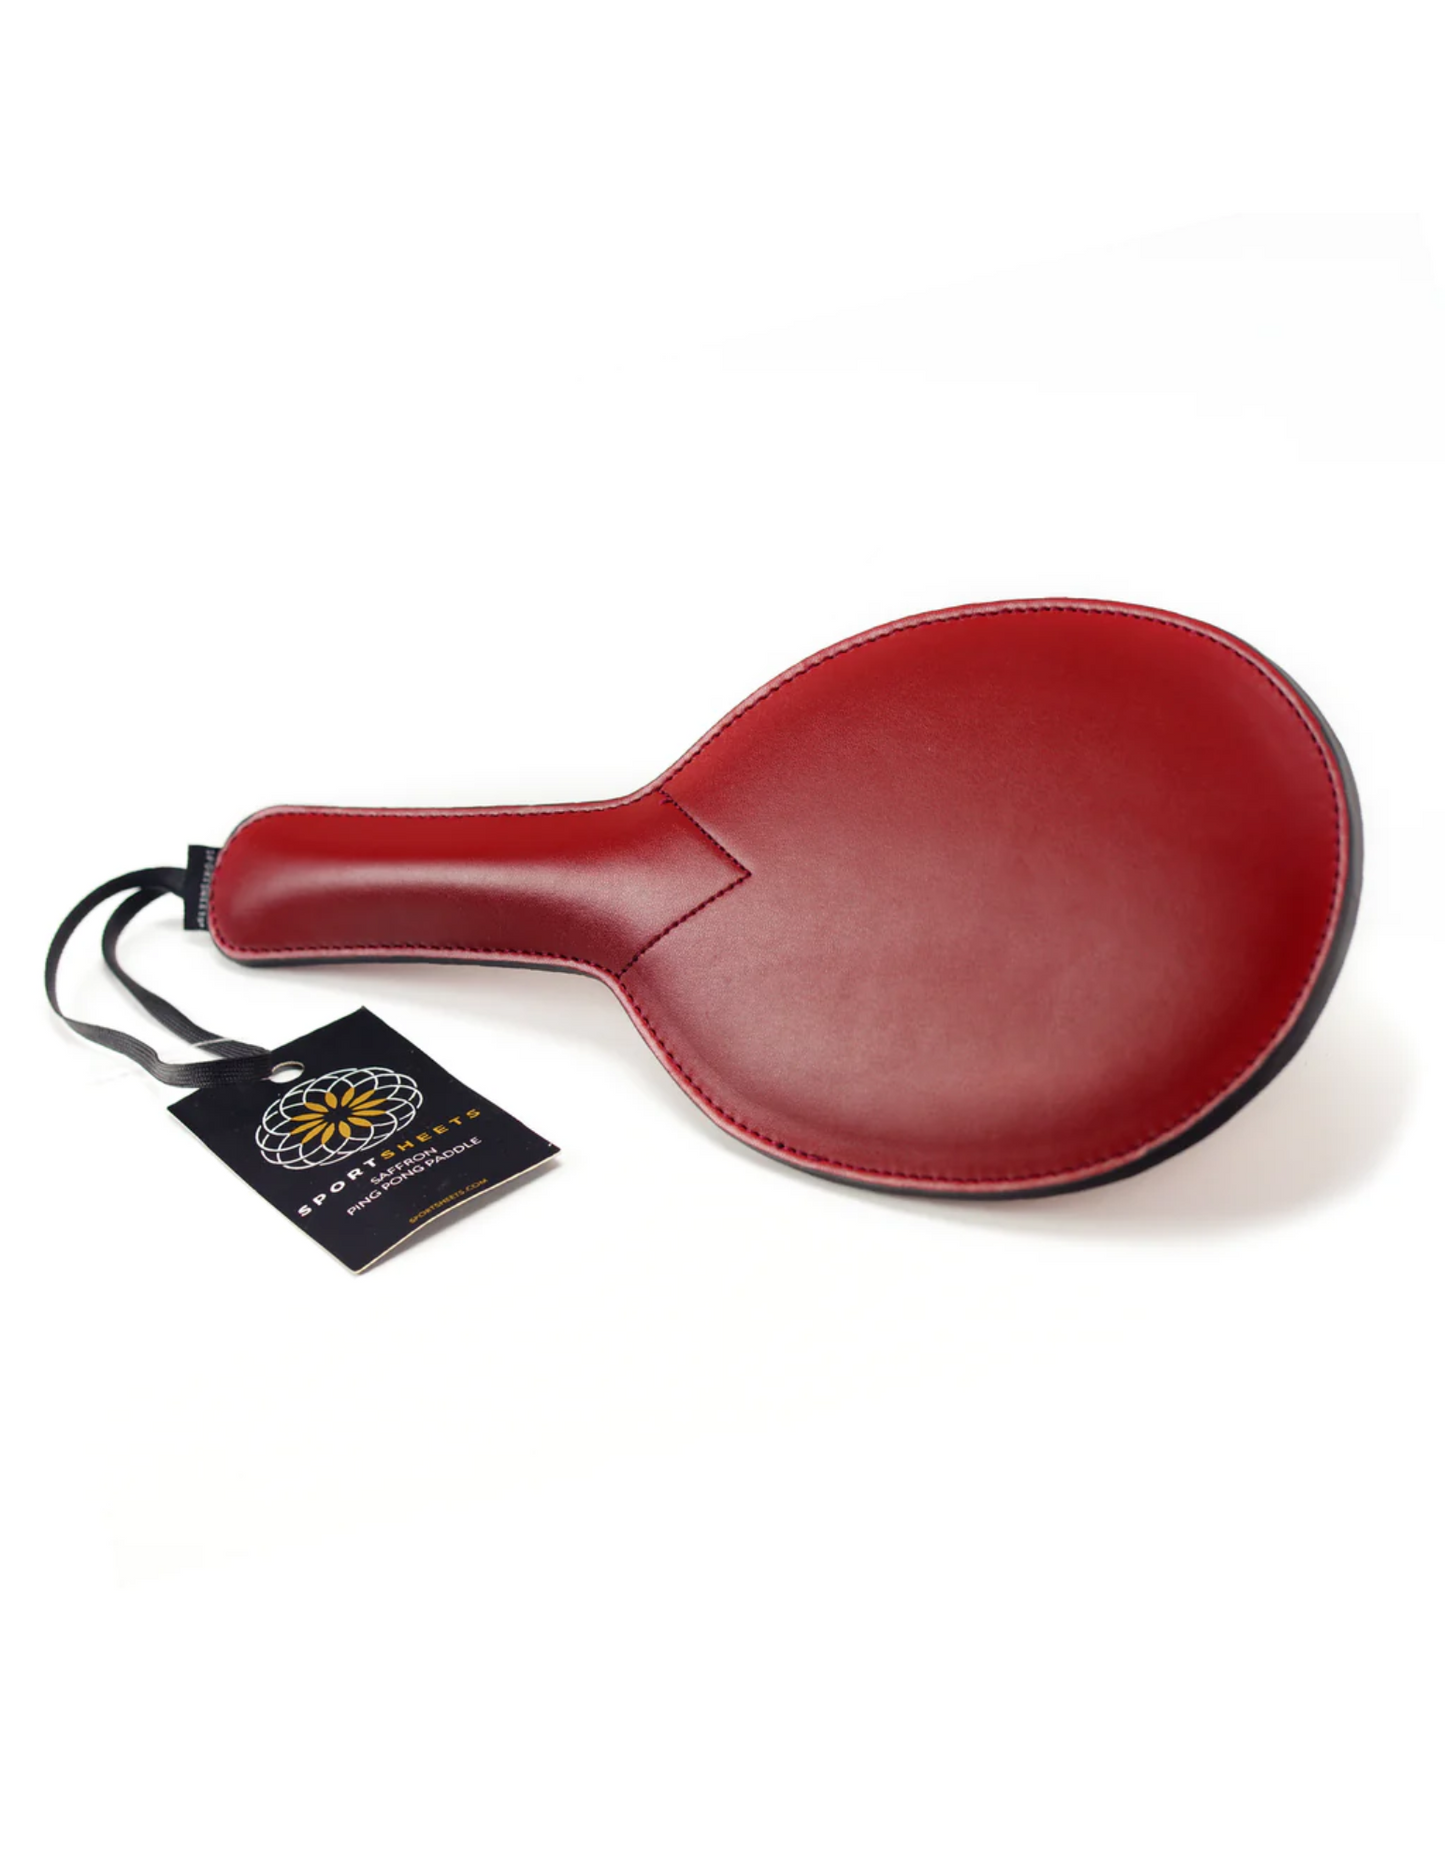 Side angle view of the Sportsheets Saffron Ping Pong Paddle (red).